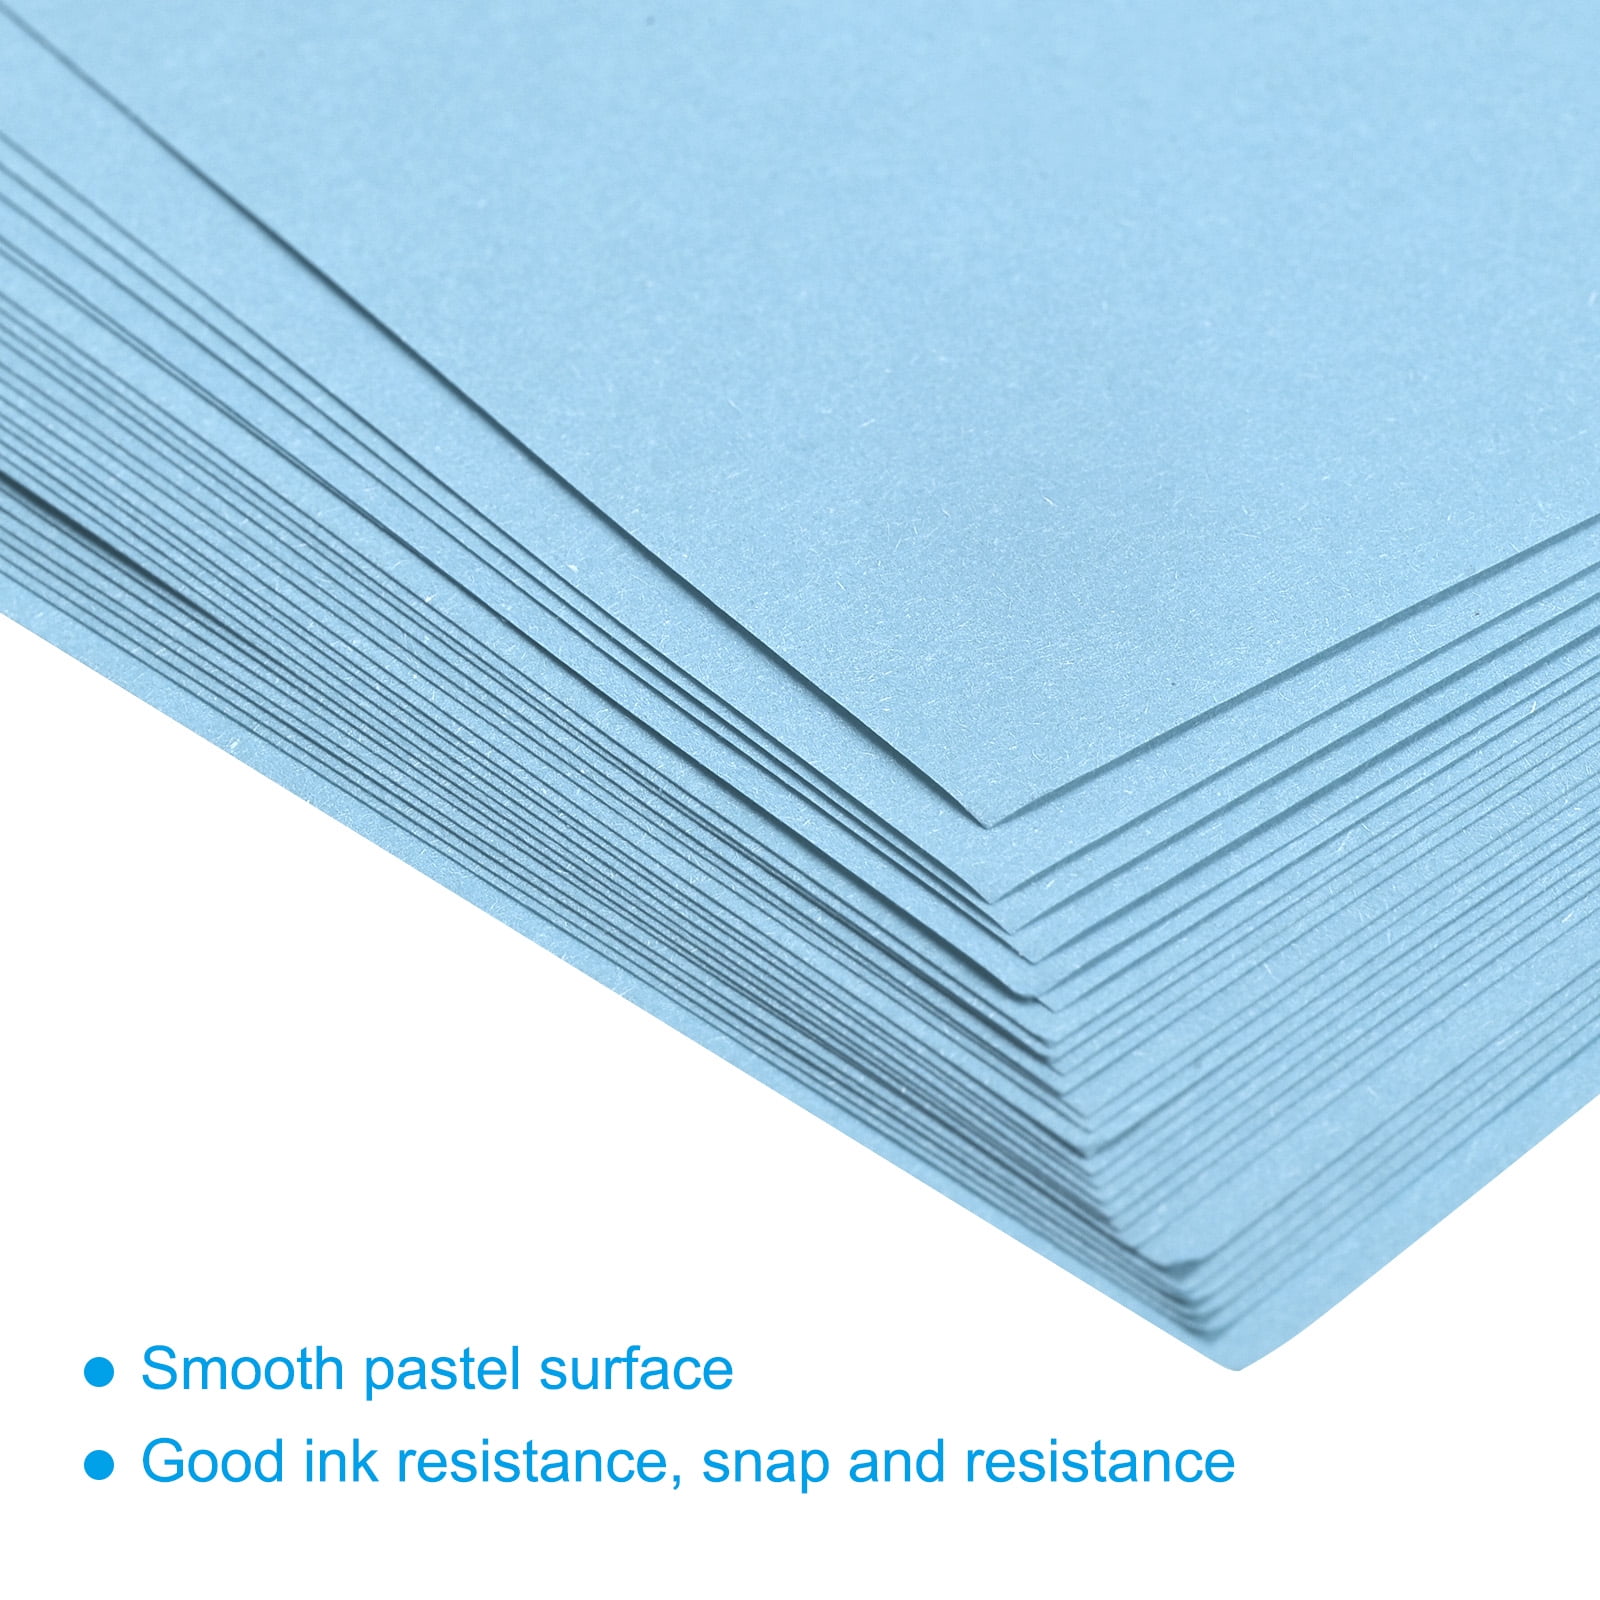 MECCANIXITY 100 Sheets Colored Copy Paper 8 1/2 Inch Printer Paper  22lb/80gsm Light Blue for Office Printing, Document Copying, Invitations,  Forms